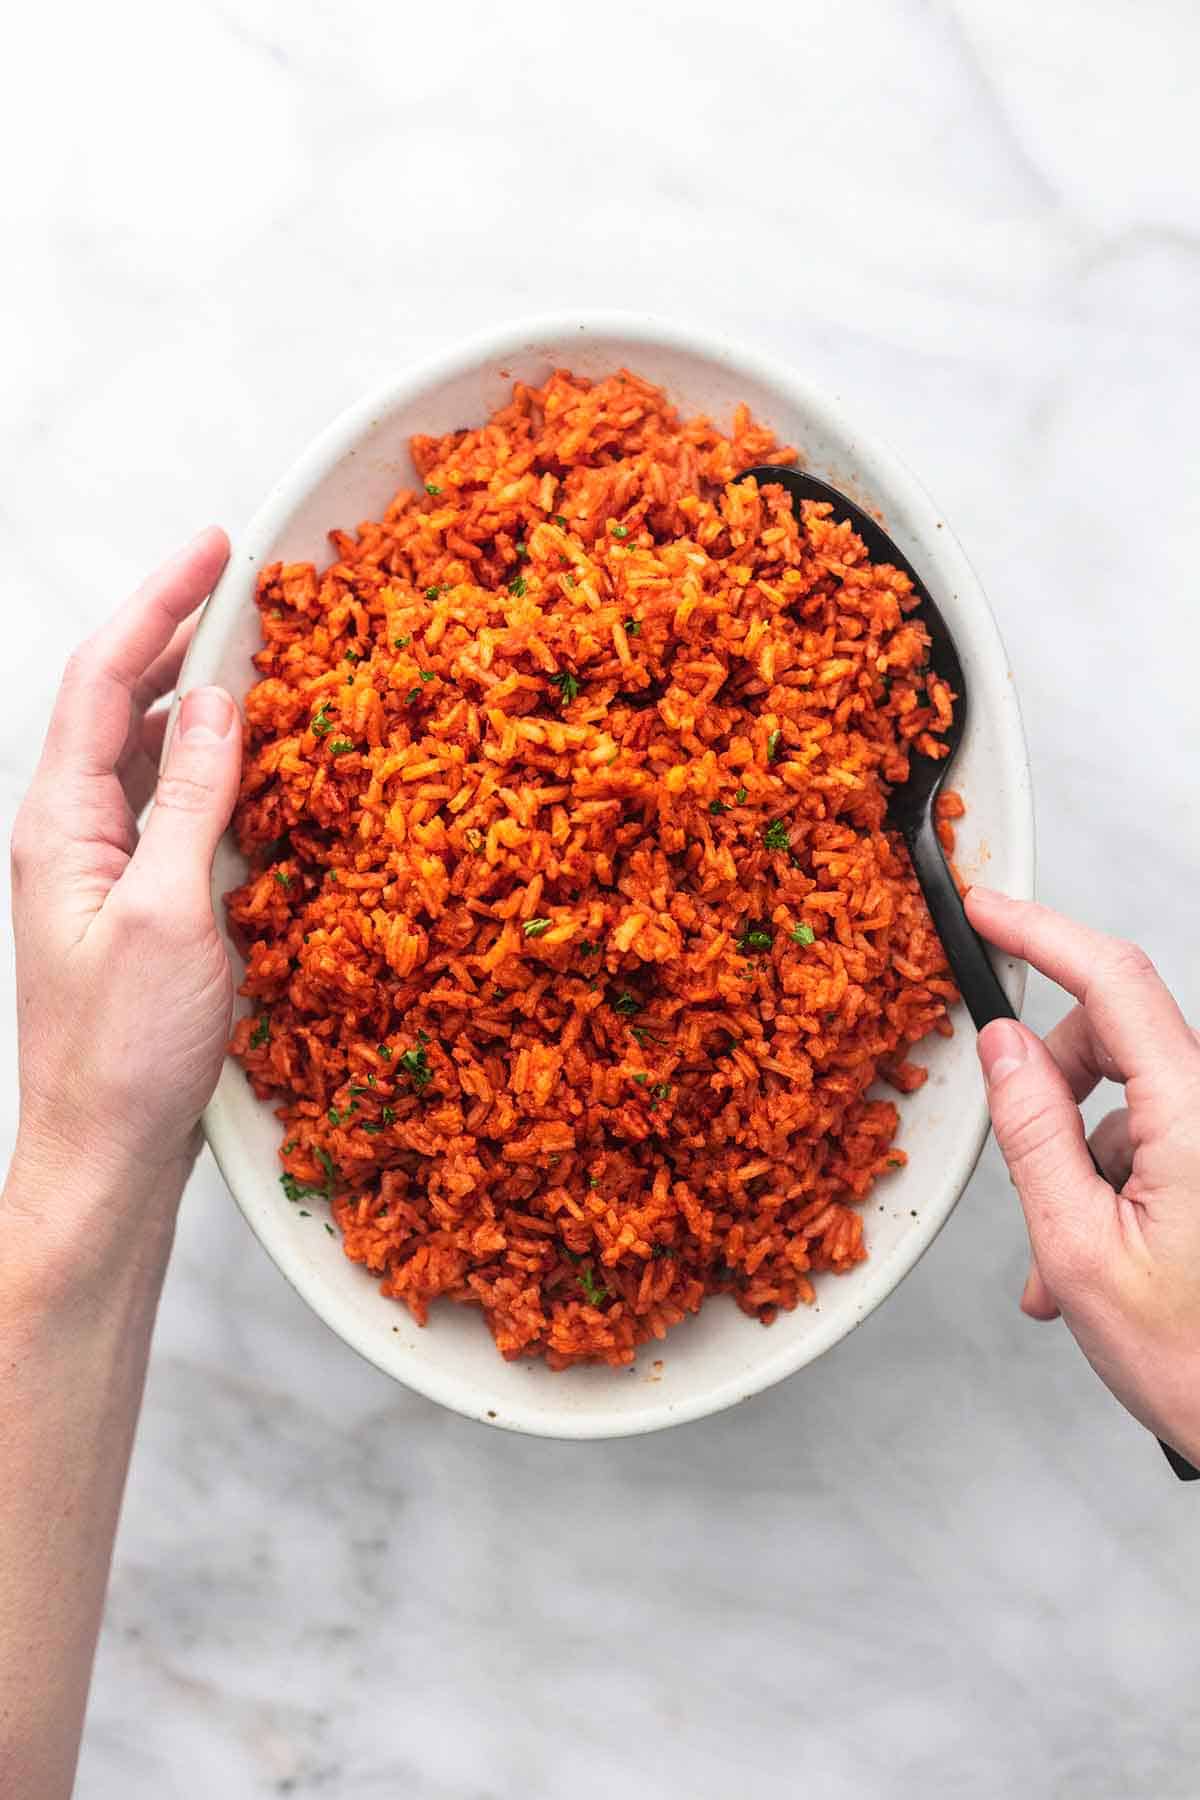 hands holding a plate with spanish rice